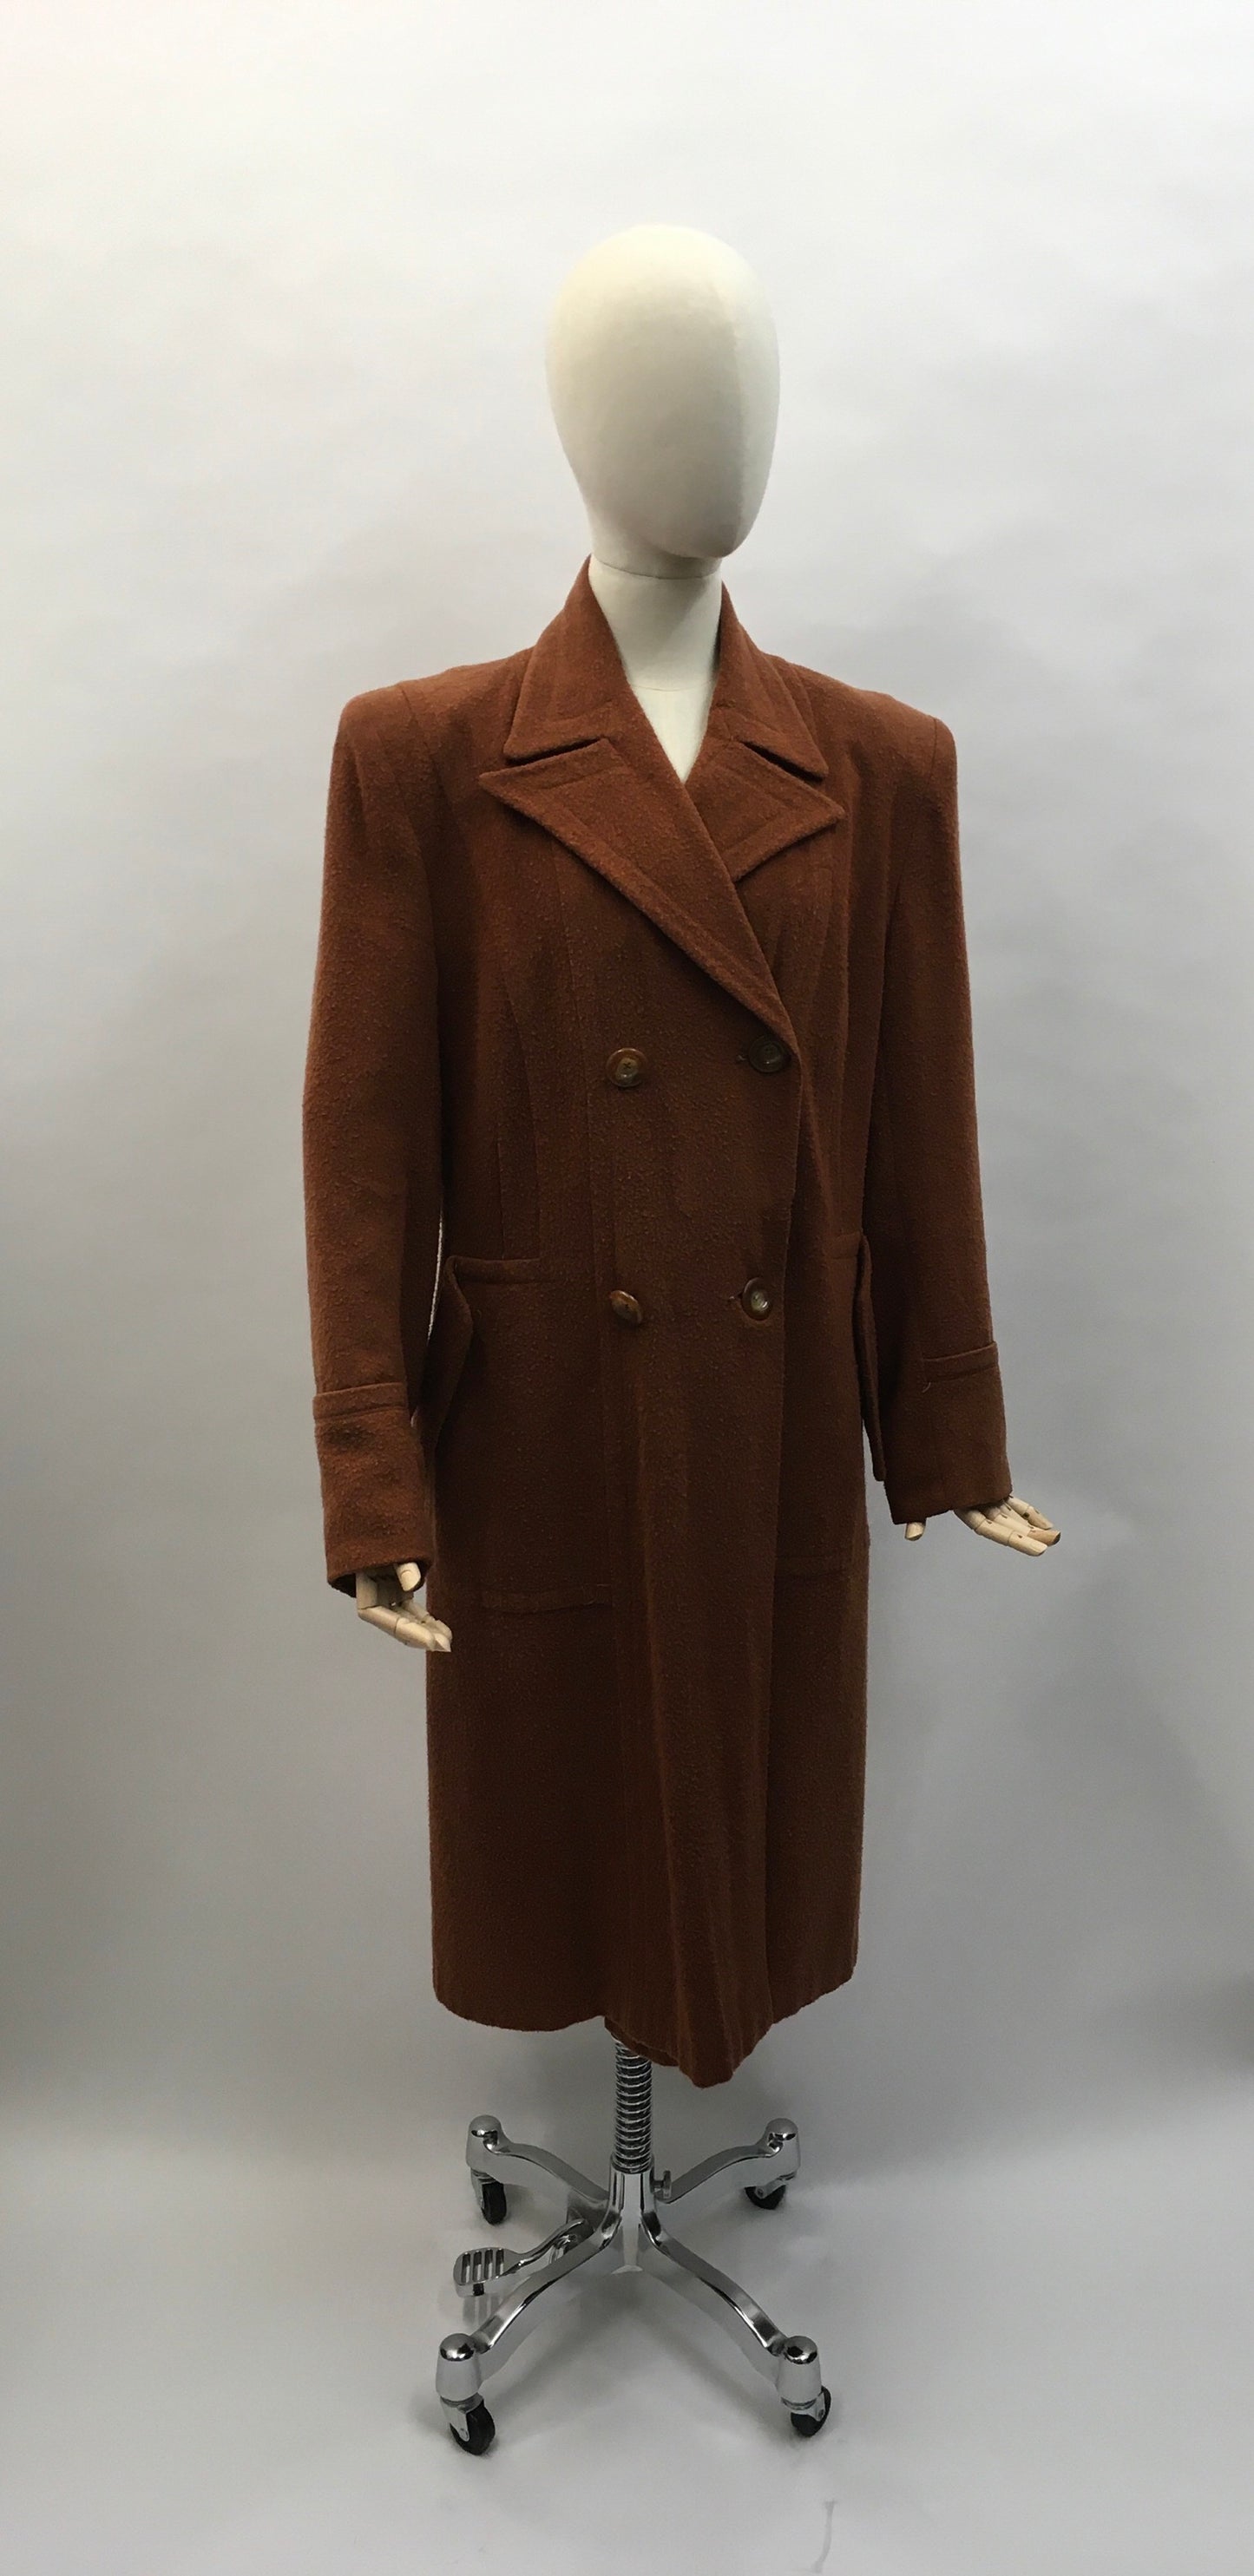 Original 1940s Utility CC41 Rust Coat - Exquisitely Tailored in a lovely soft rust wool